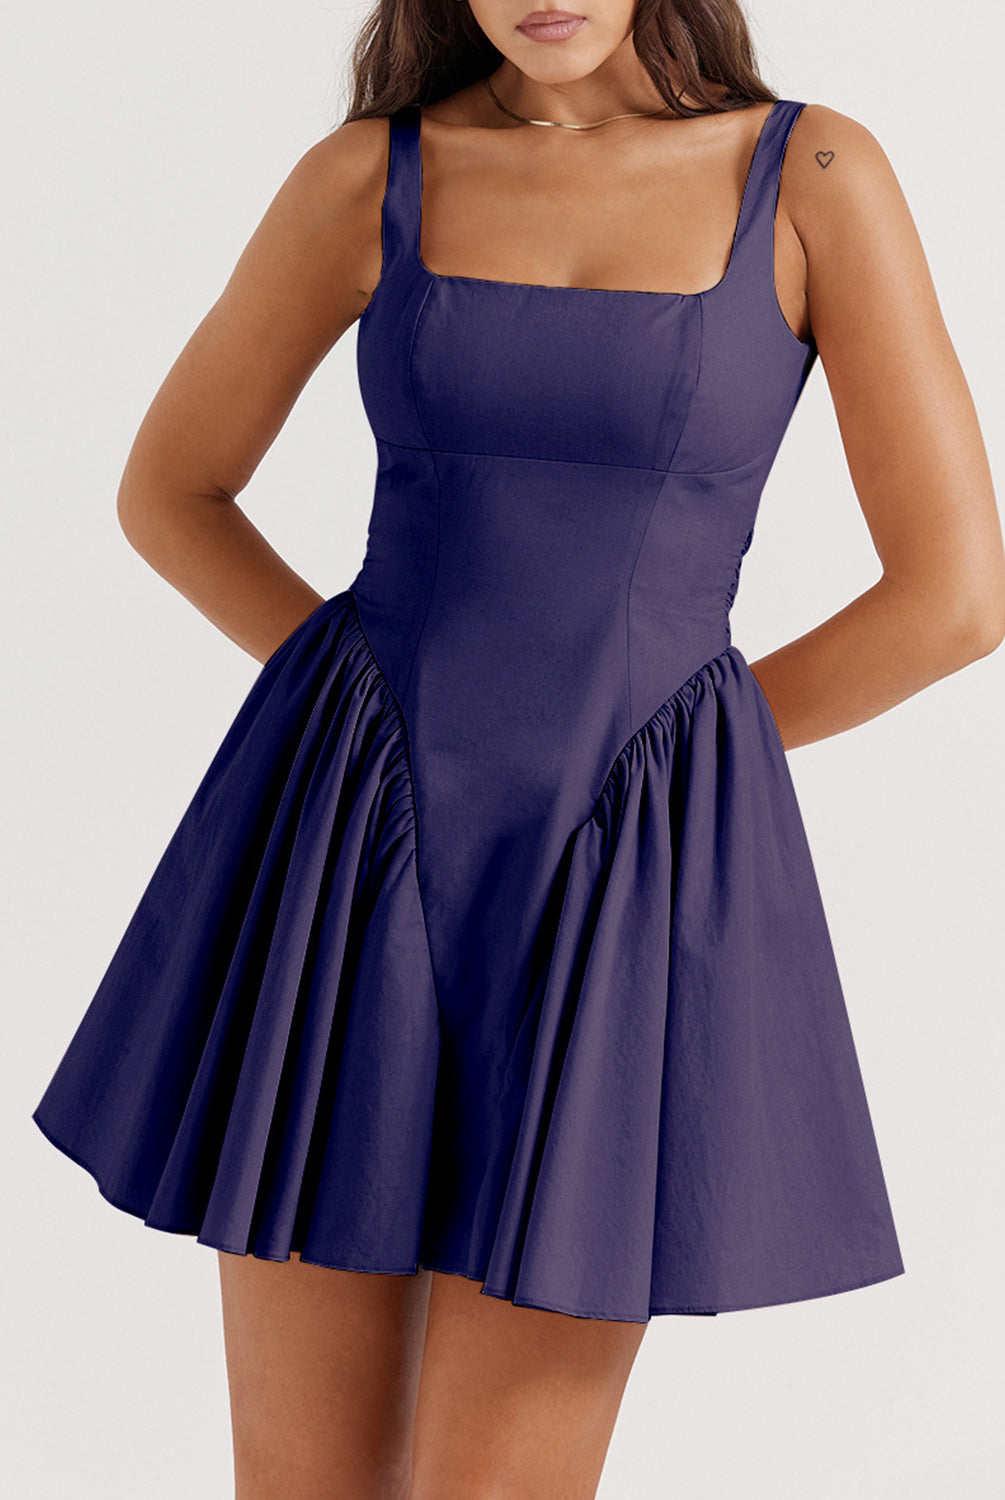 A model exudes elegance in a navy square neck mini dress, showcasing the fitted bodice and flared skirt, making it a perfect choice for a sophisticated night out.